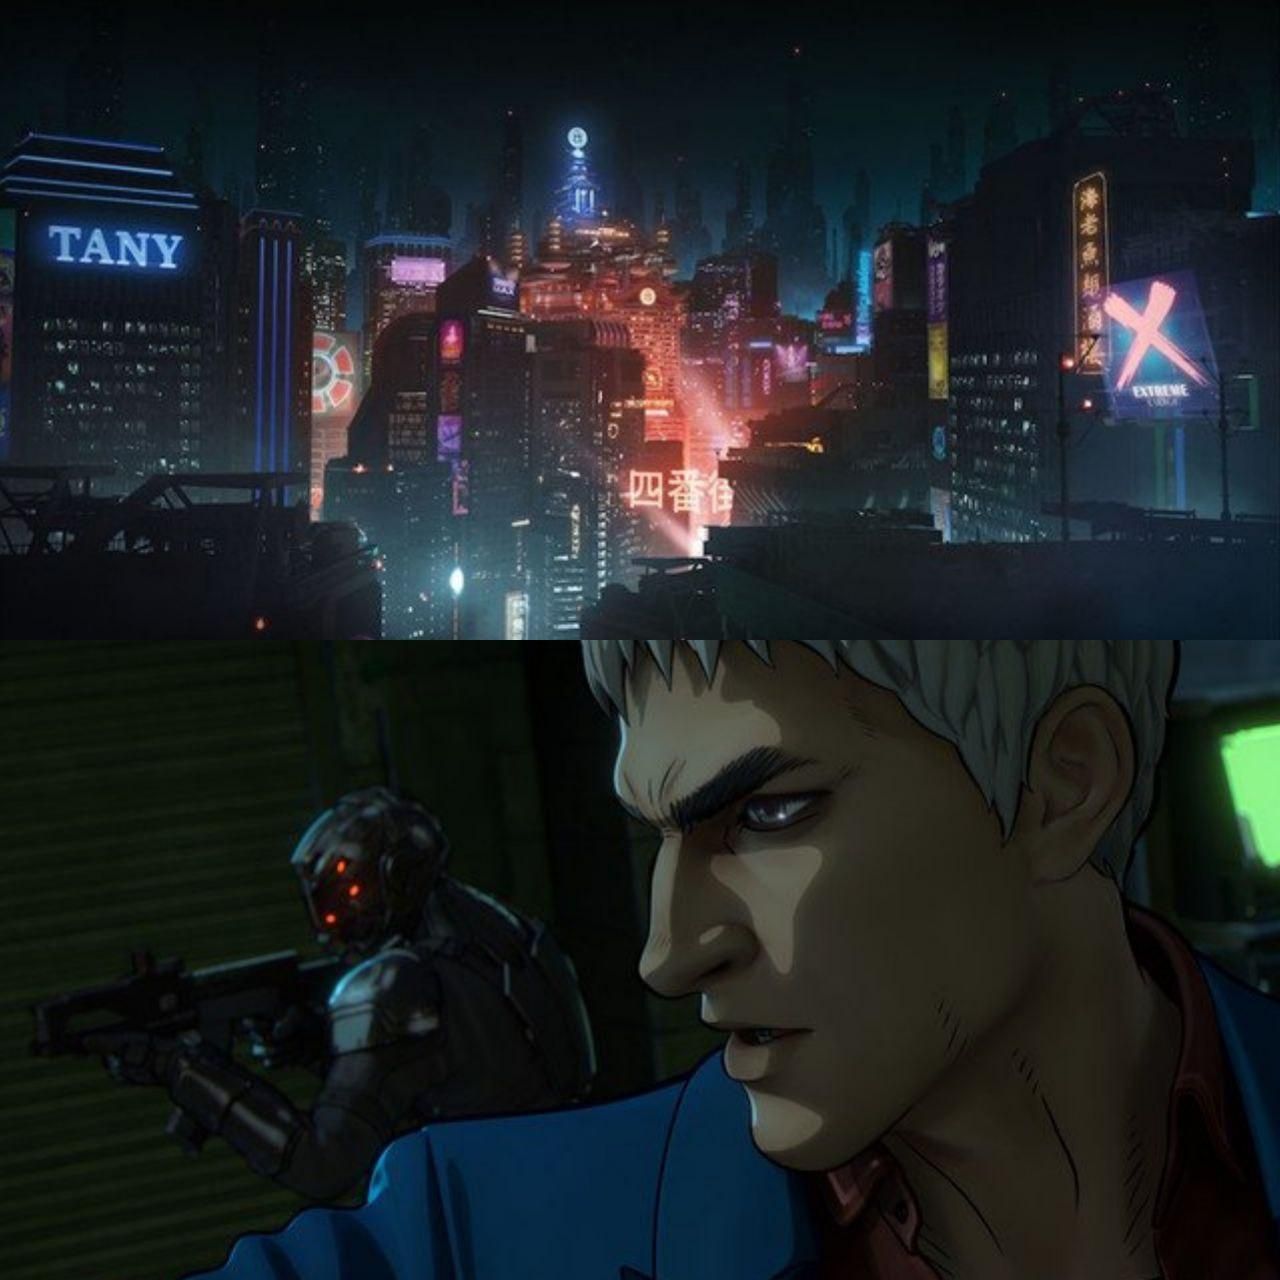 The First Still Animated Film Altered Carbon: Resleeved.Netflix's New Anime Project Is Based On The Altered Carbon Series. The Show Will Become A Kind Of Spin O